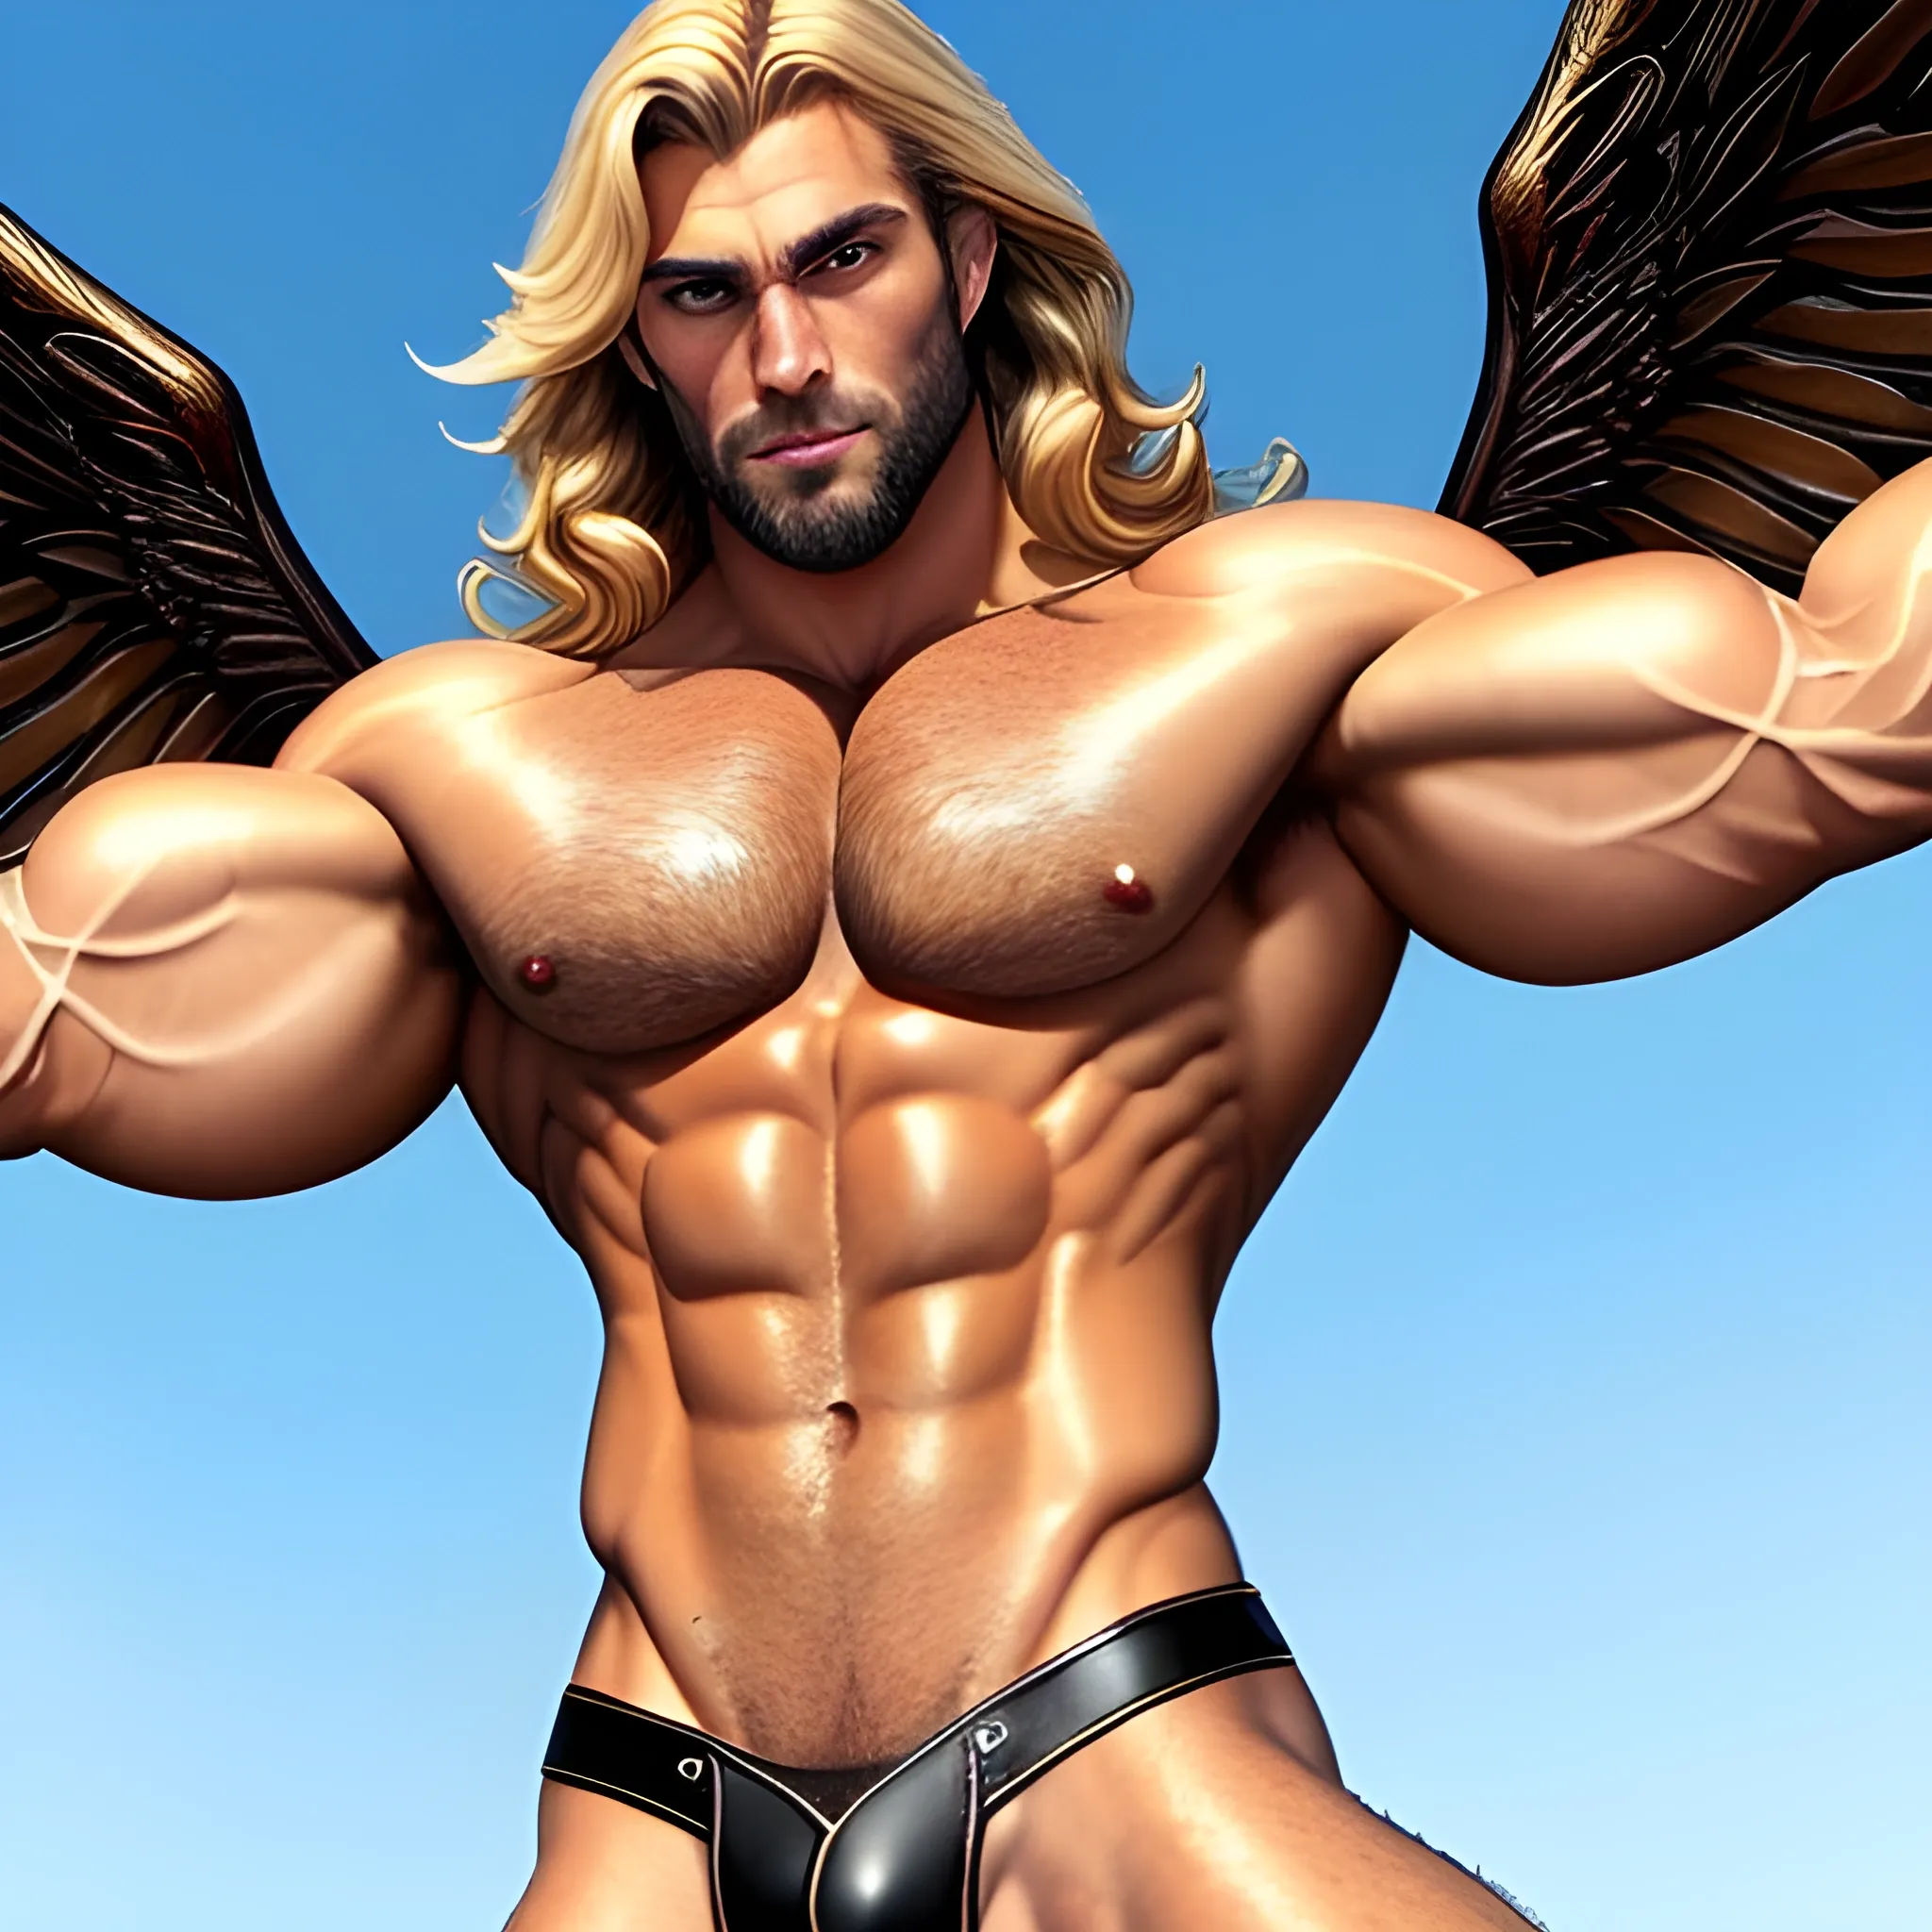 muscular blond Dude with expansive Wings,handsome,beauty,muscle,standing firmly,german, tanned skin,long curly hair,,colorfull small leather tanga with gold details,same facial halves, bulge ,happy,whole body with legs,big bulge,dark piercing eyes,huge bulge,hairy,fine details, young,two identical symmetrical eyes,same colofull eyes, stubble ,blond,very long hair cascading over a hairy Chest,reminiscent of an Angel,
